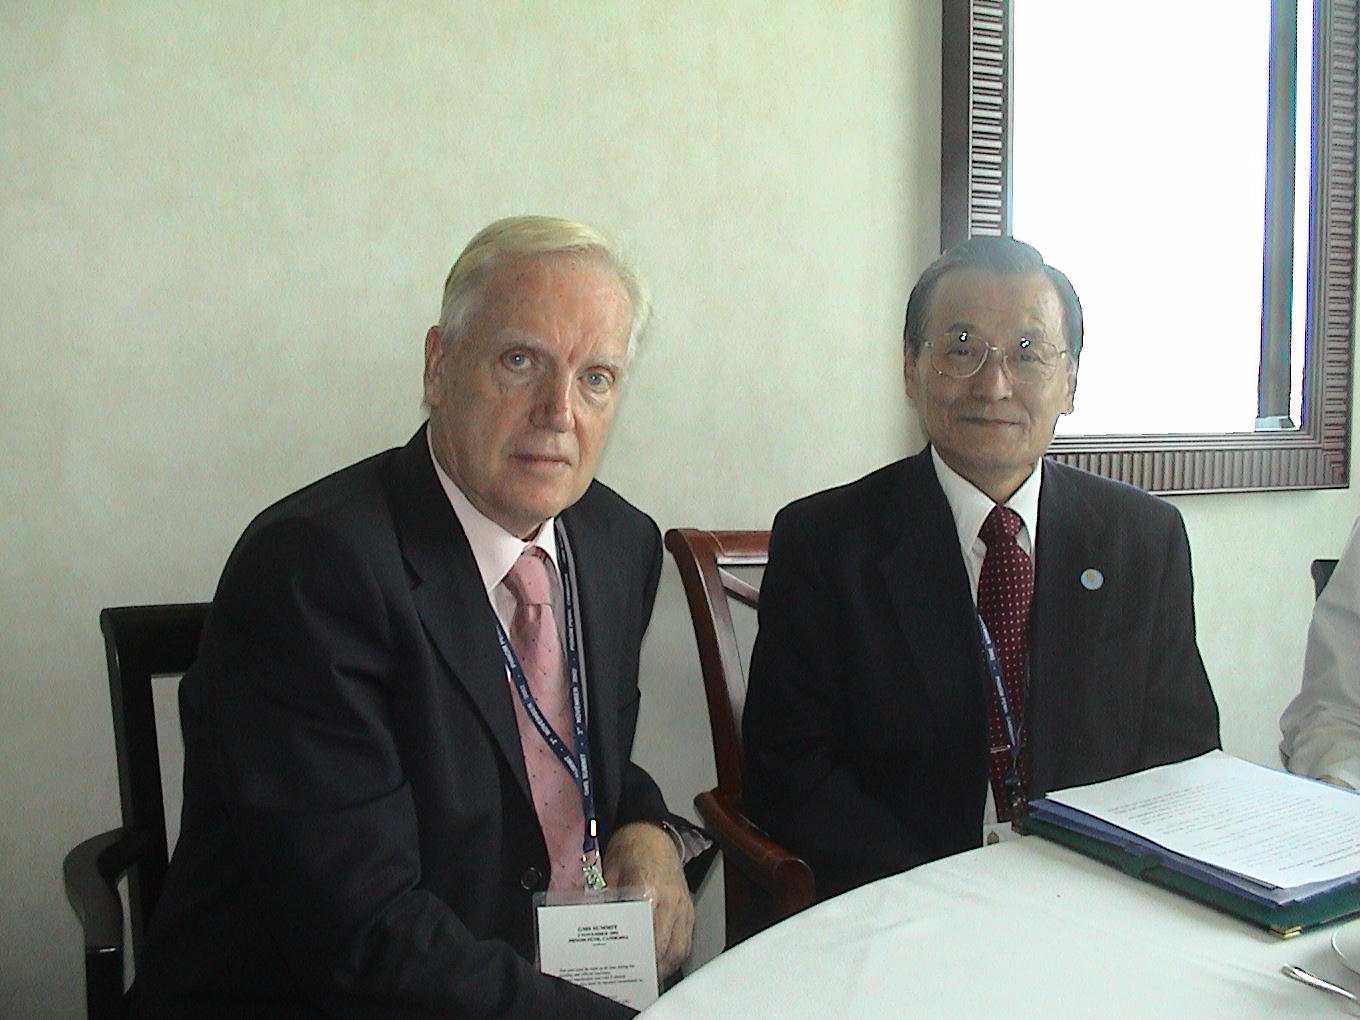 David Husband with Mr. Tadeo Chino, President of the Asian Development Bank